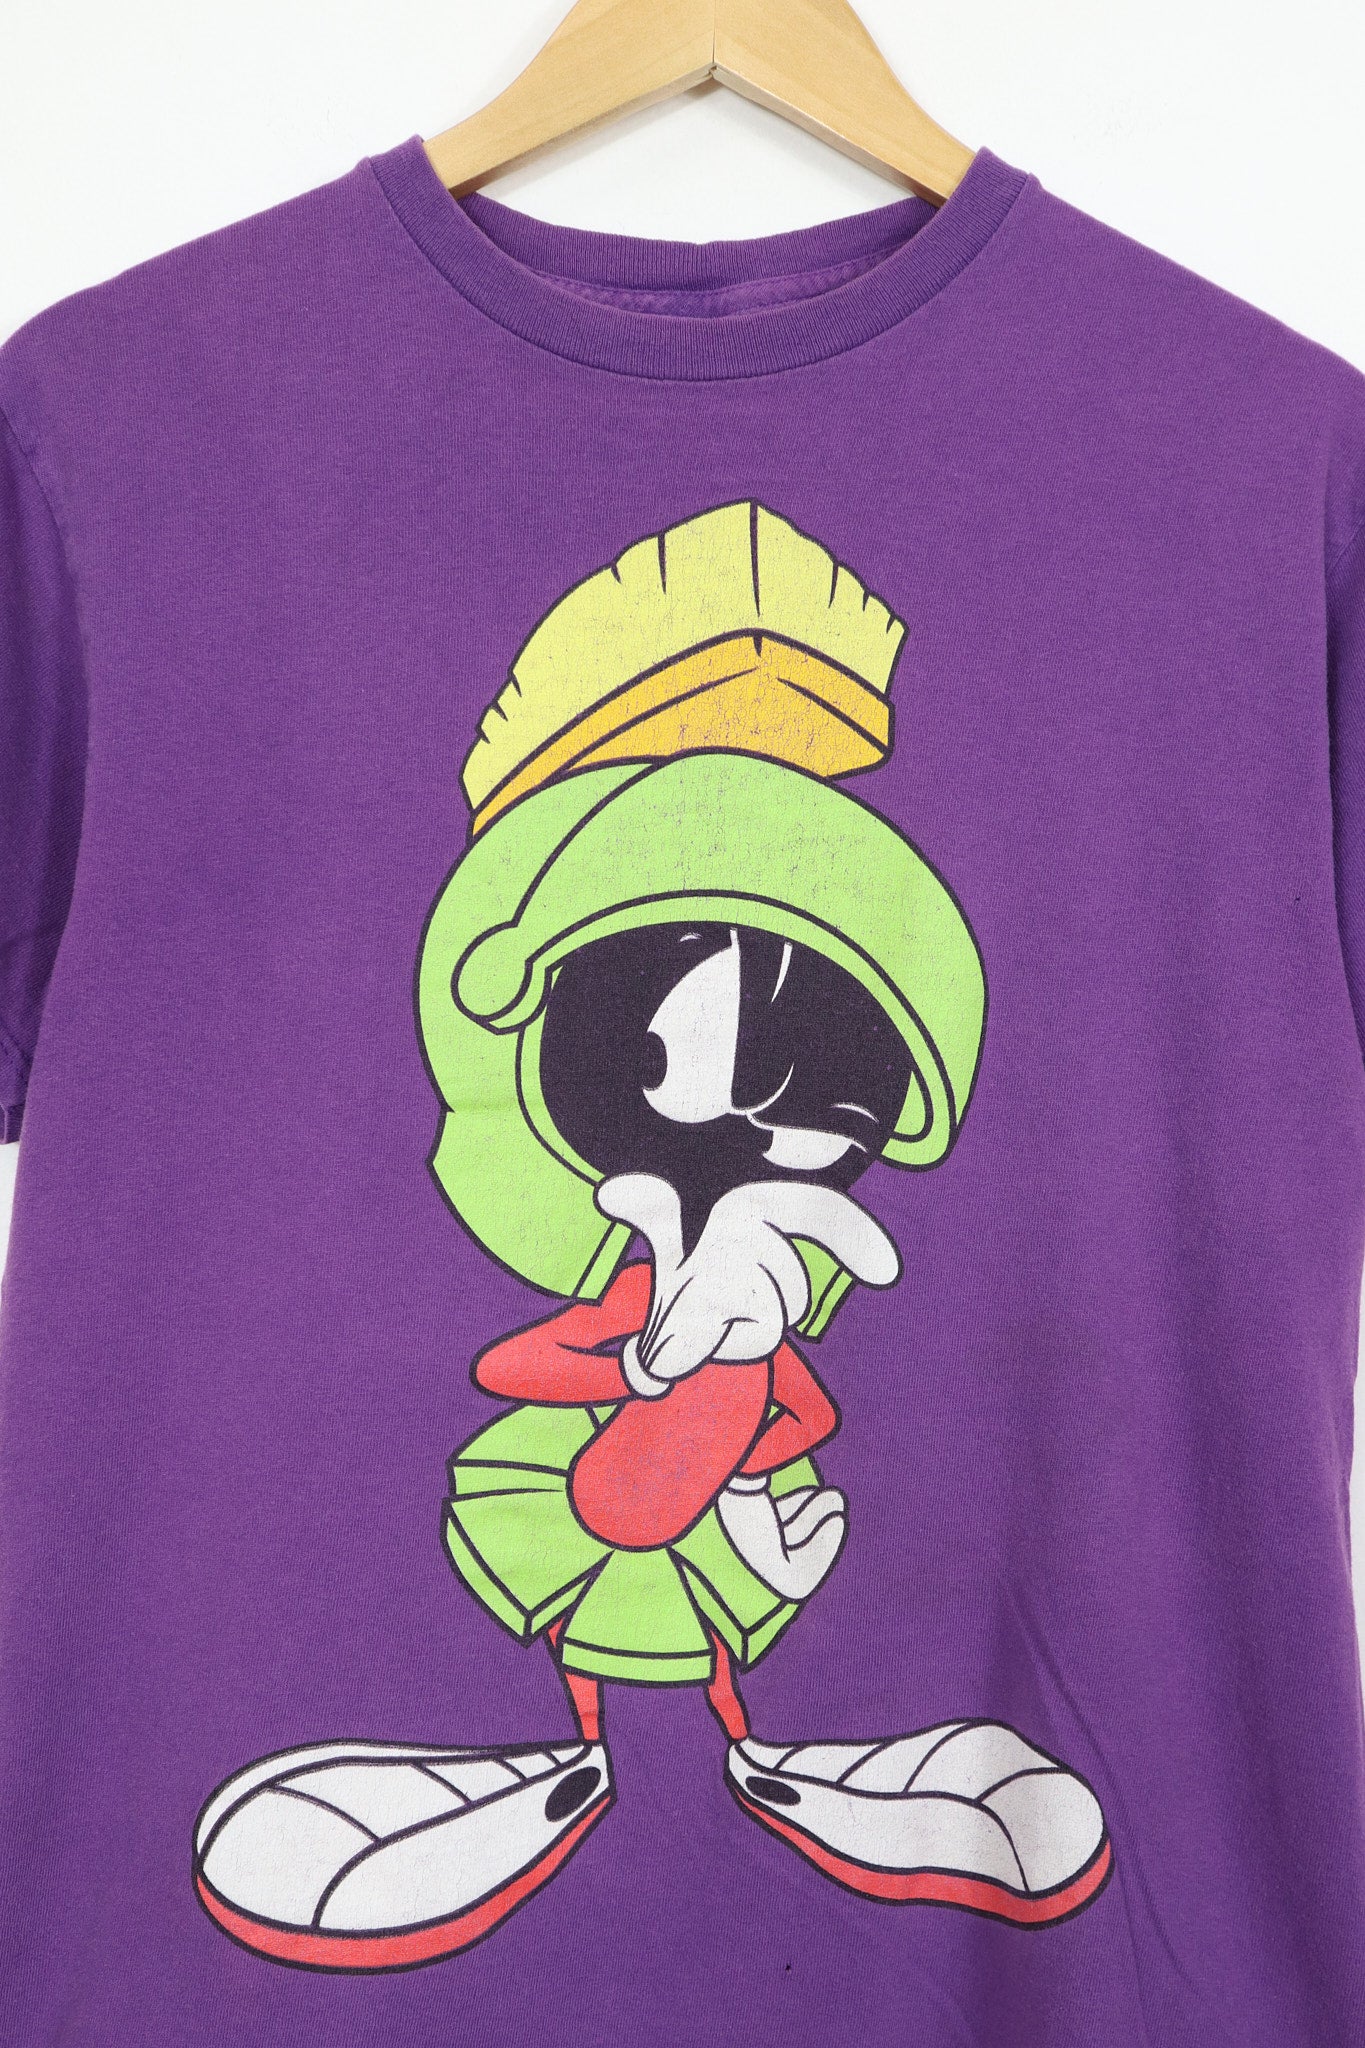 Vintage Marvin the Martian Tee